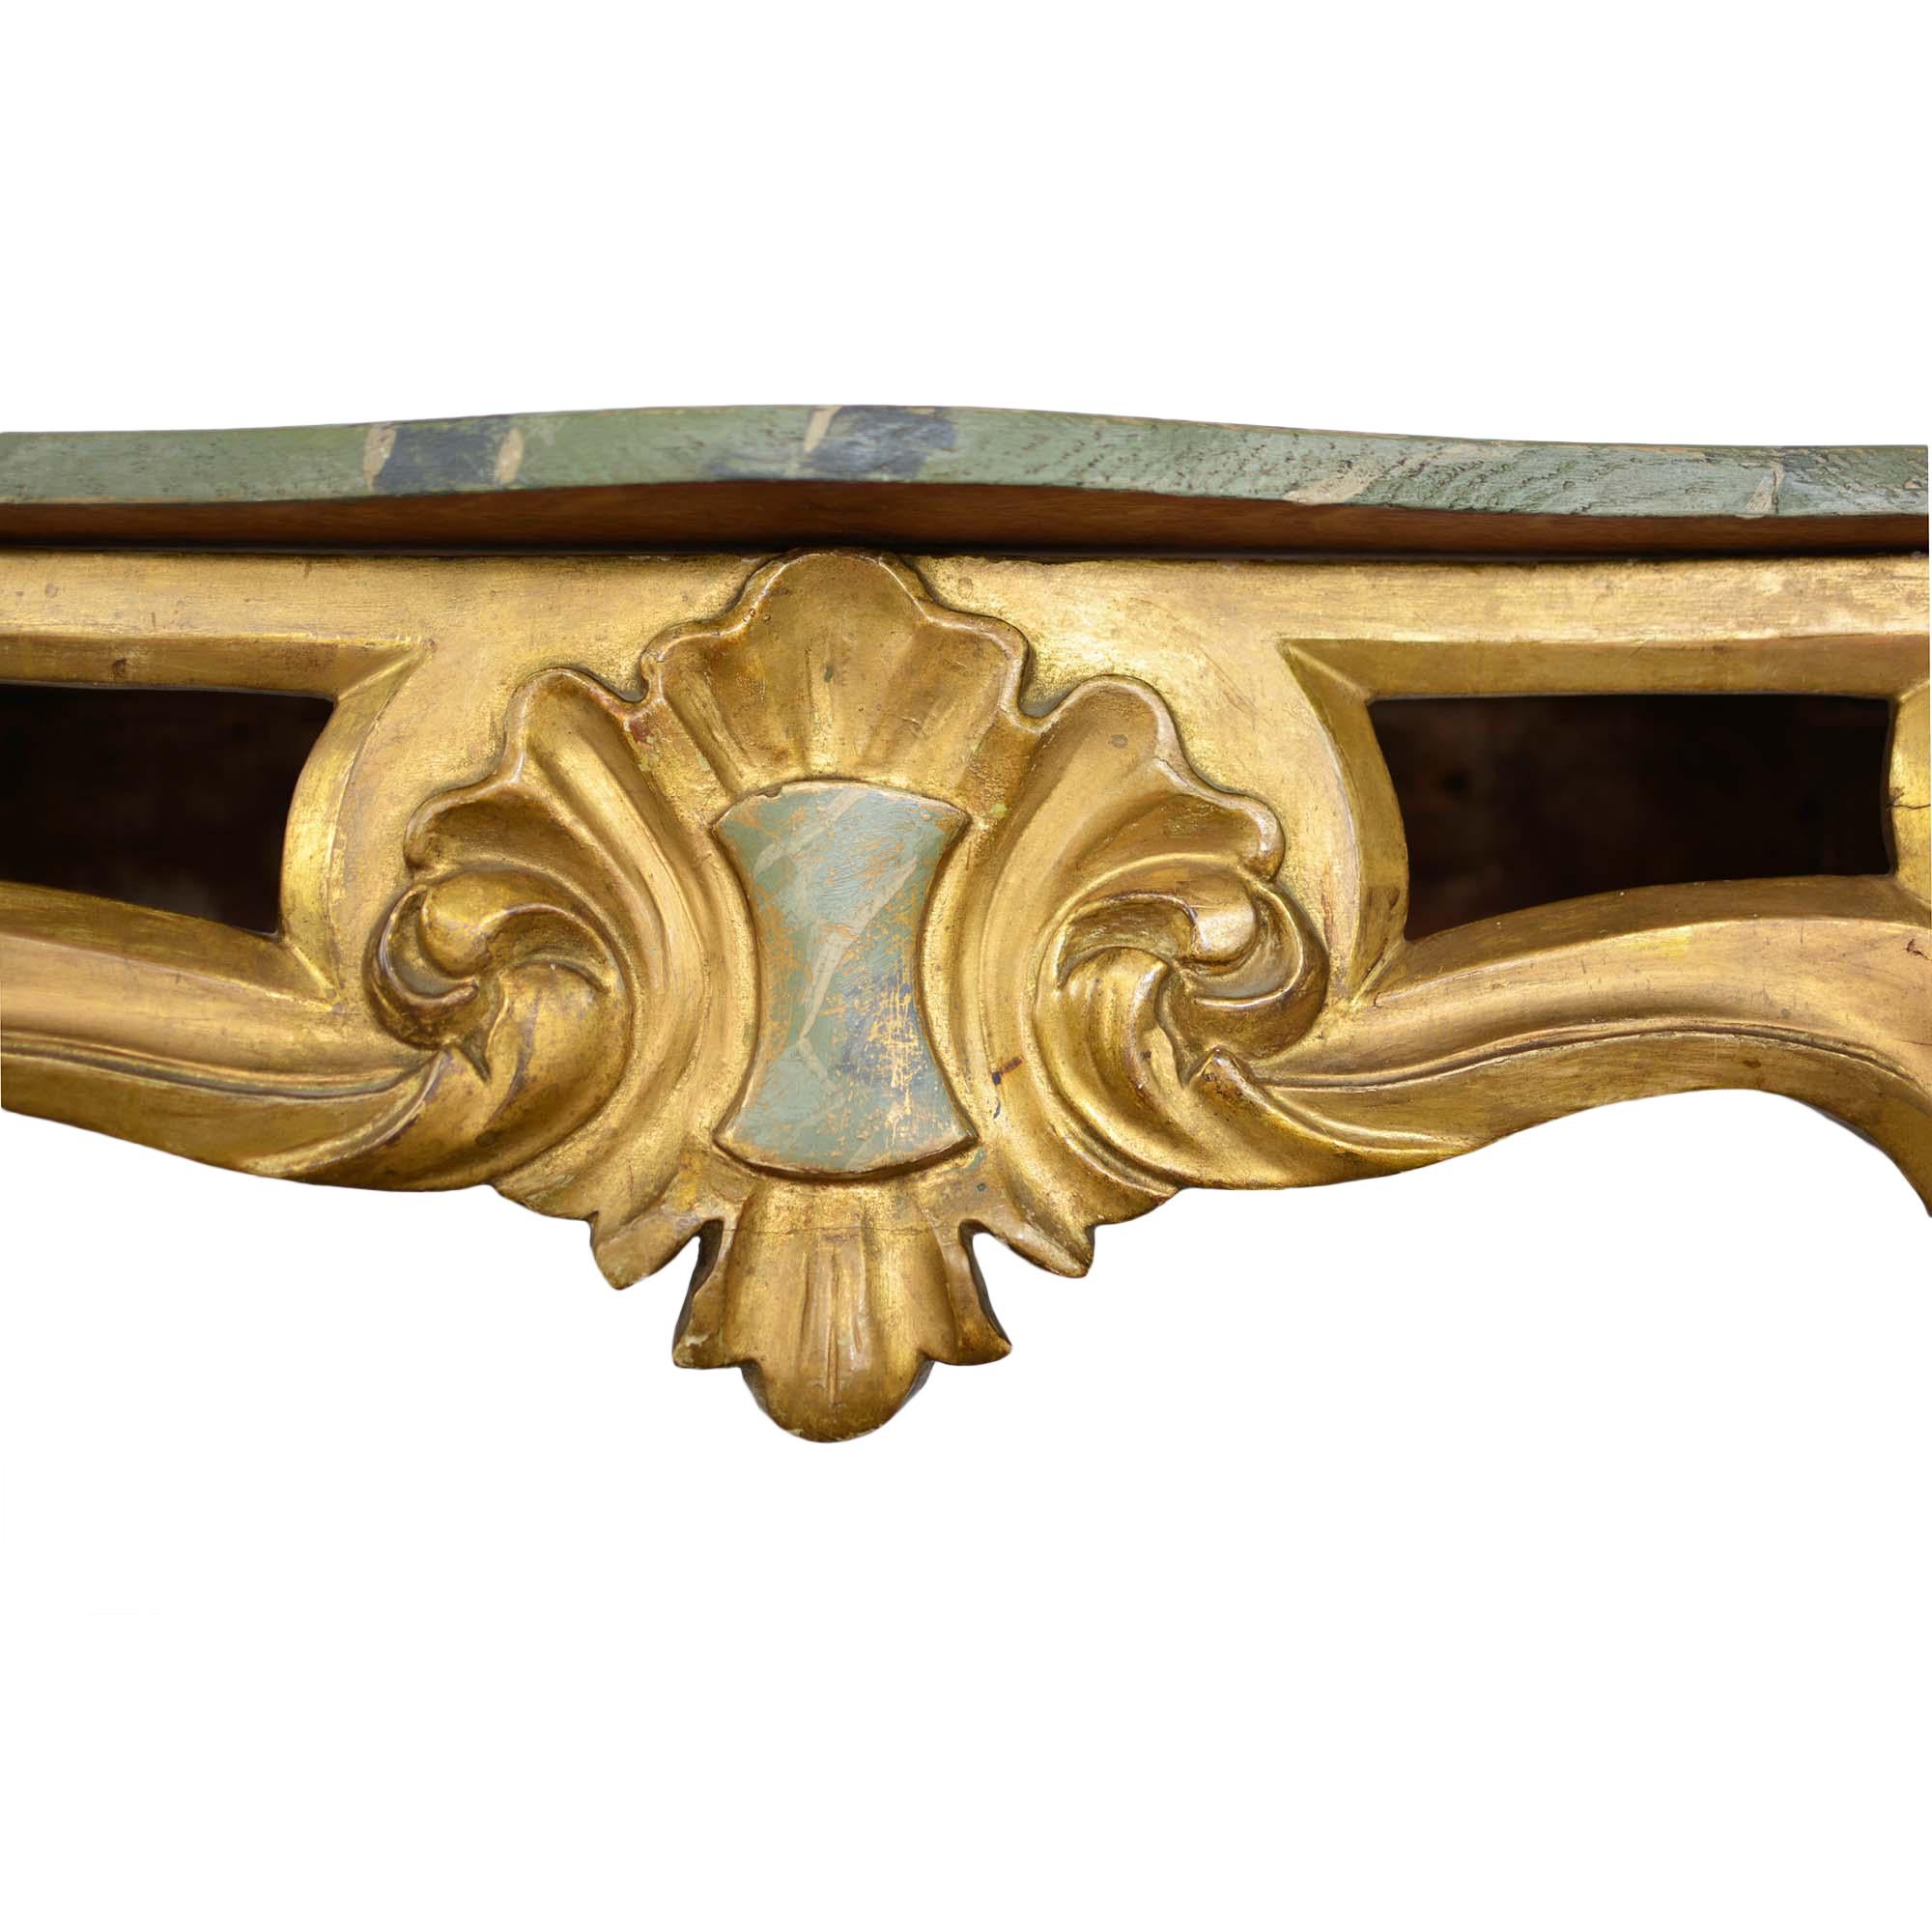 20th Century Louis XV Style Wall Mounted Console Gilded Wood Faux Marble Top For Sale